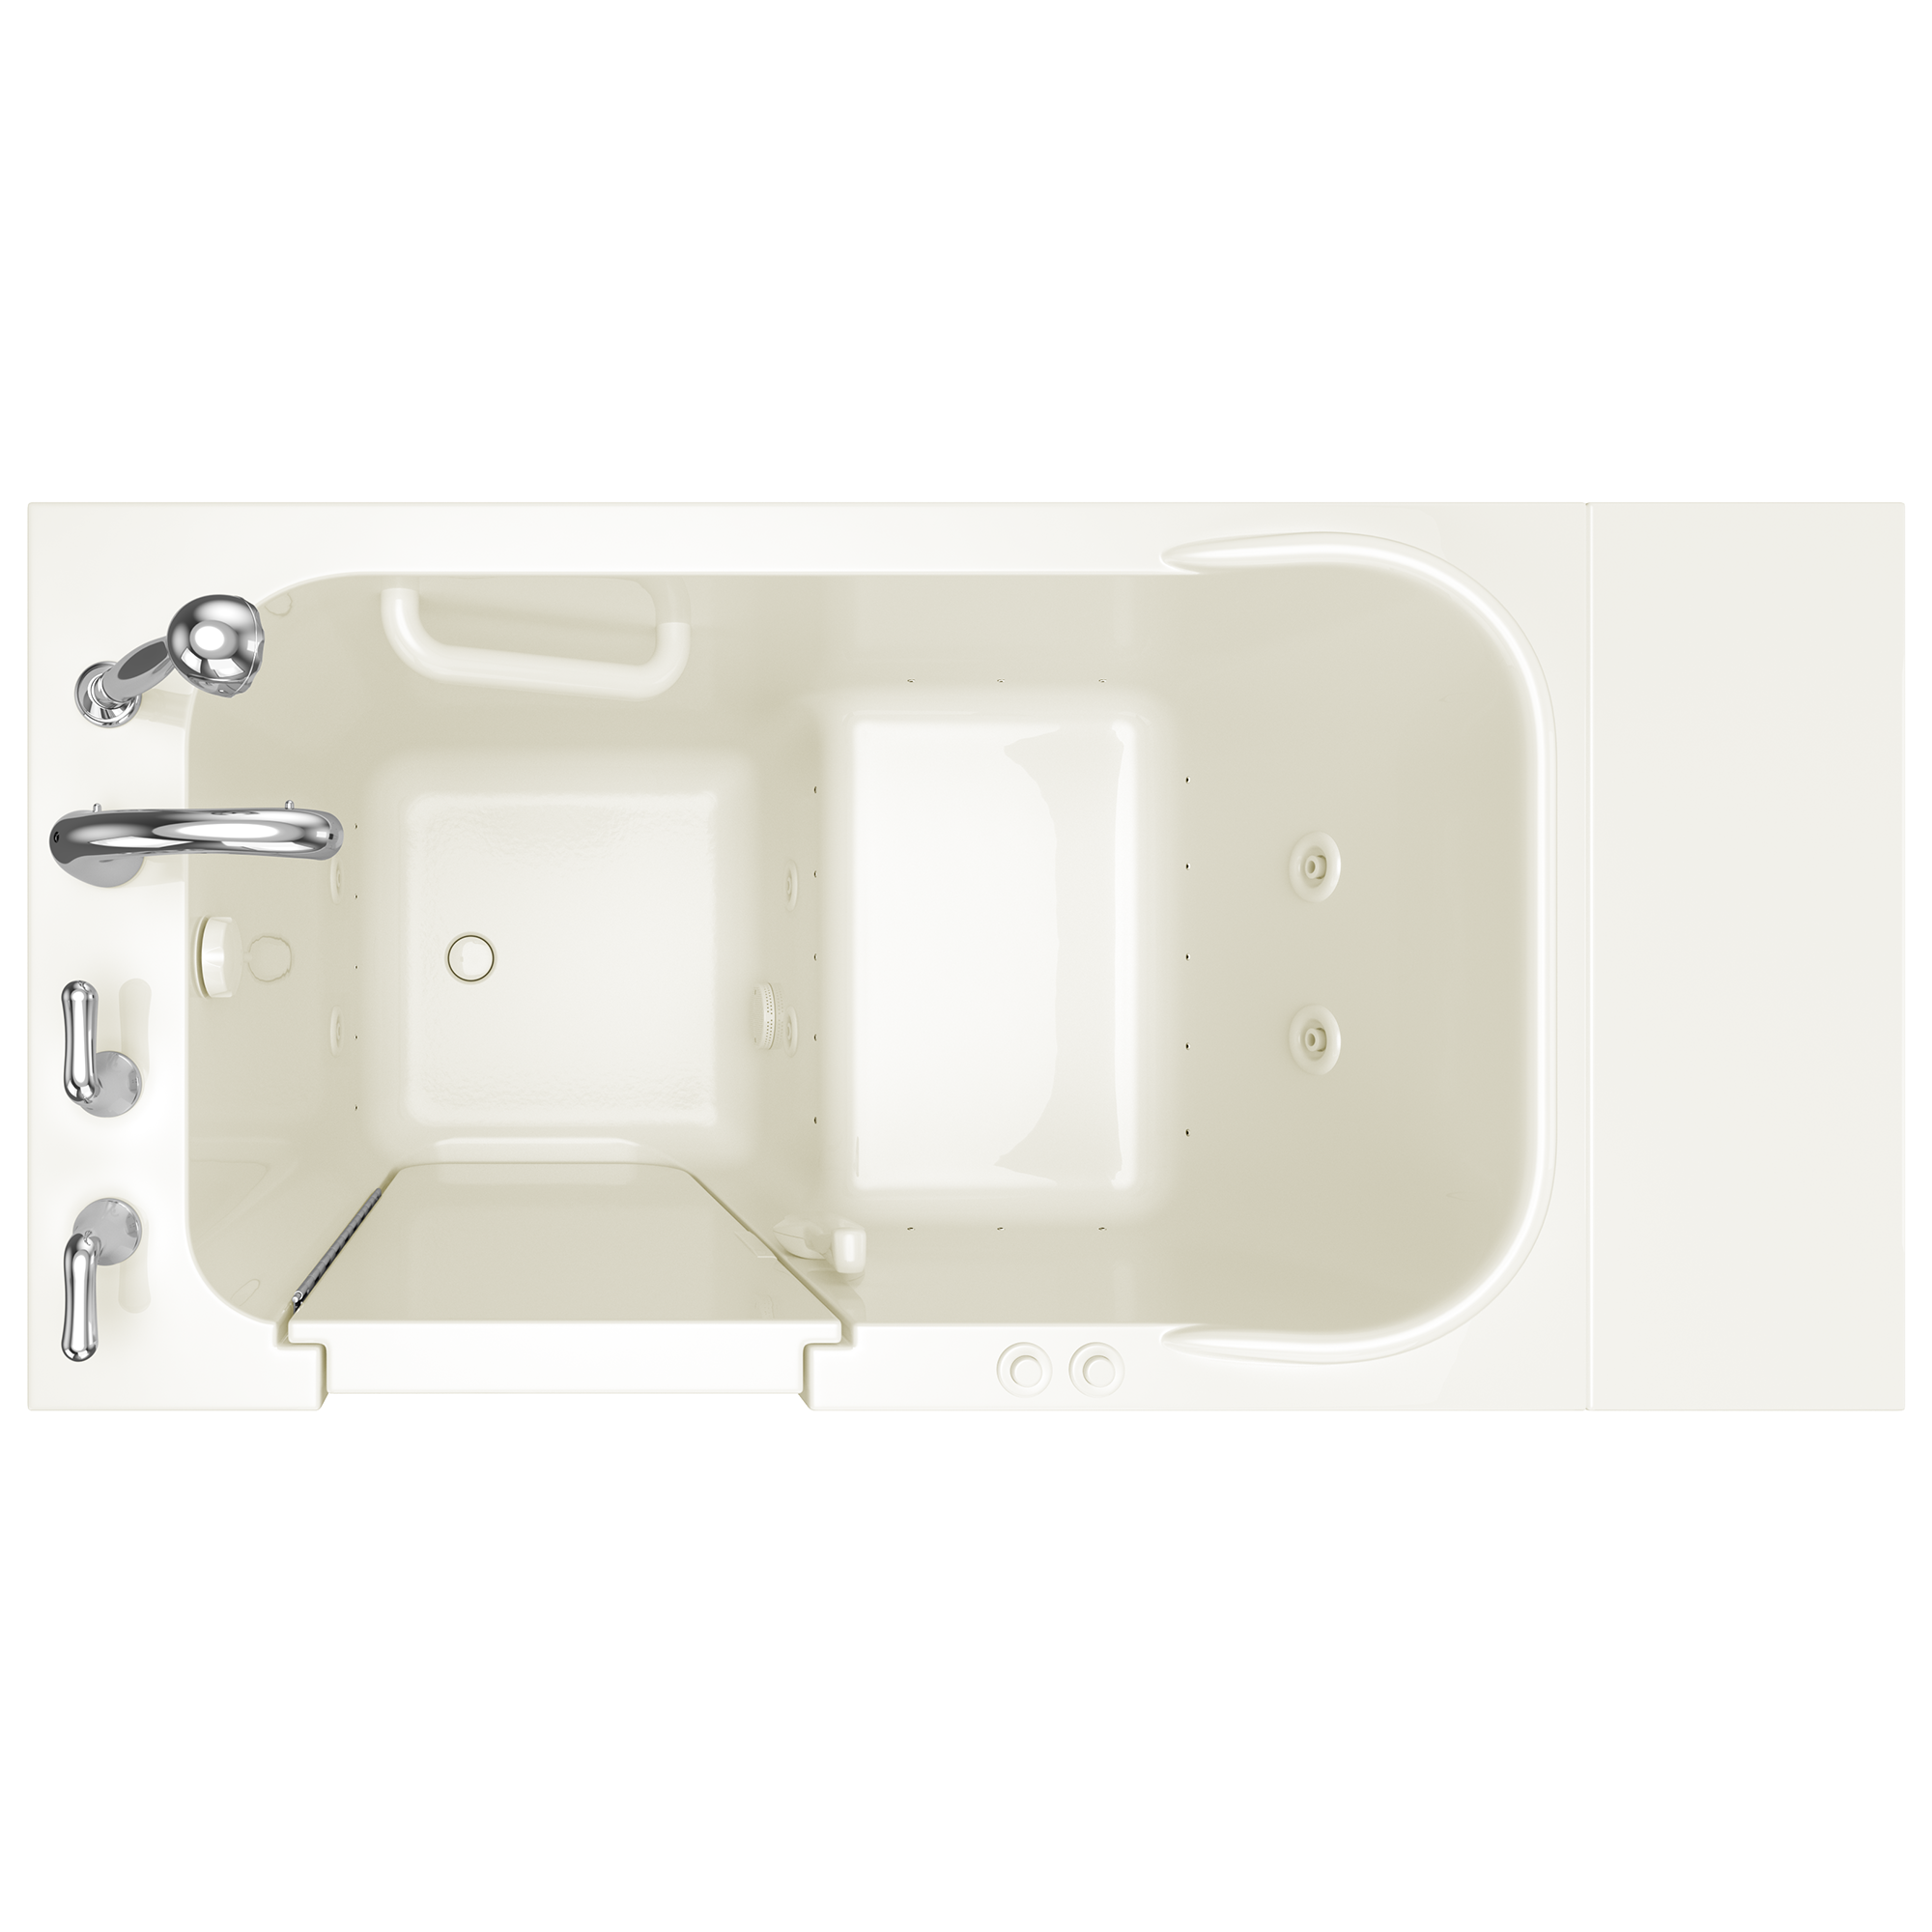 Gelcoat Entry Series 48 x 28 Inch Walk In Tub With Combination Air Spa and Whirlpool Systems - Left Hand Drain With Faucet ST BISCUIT